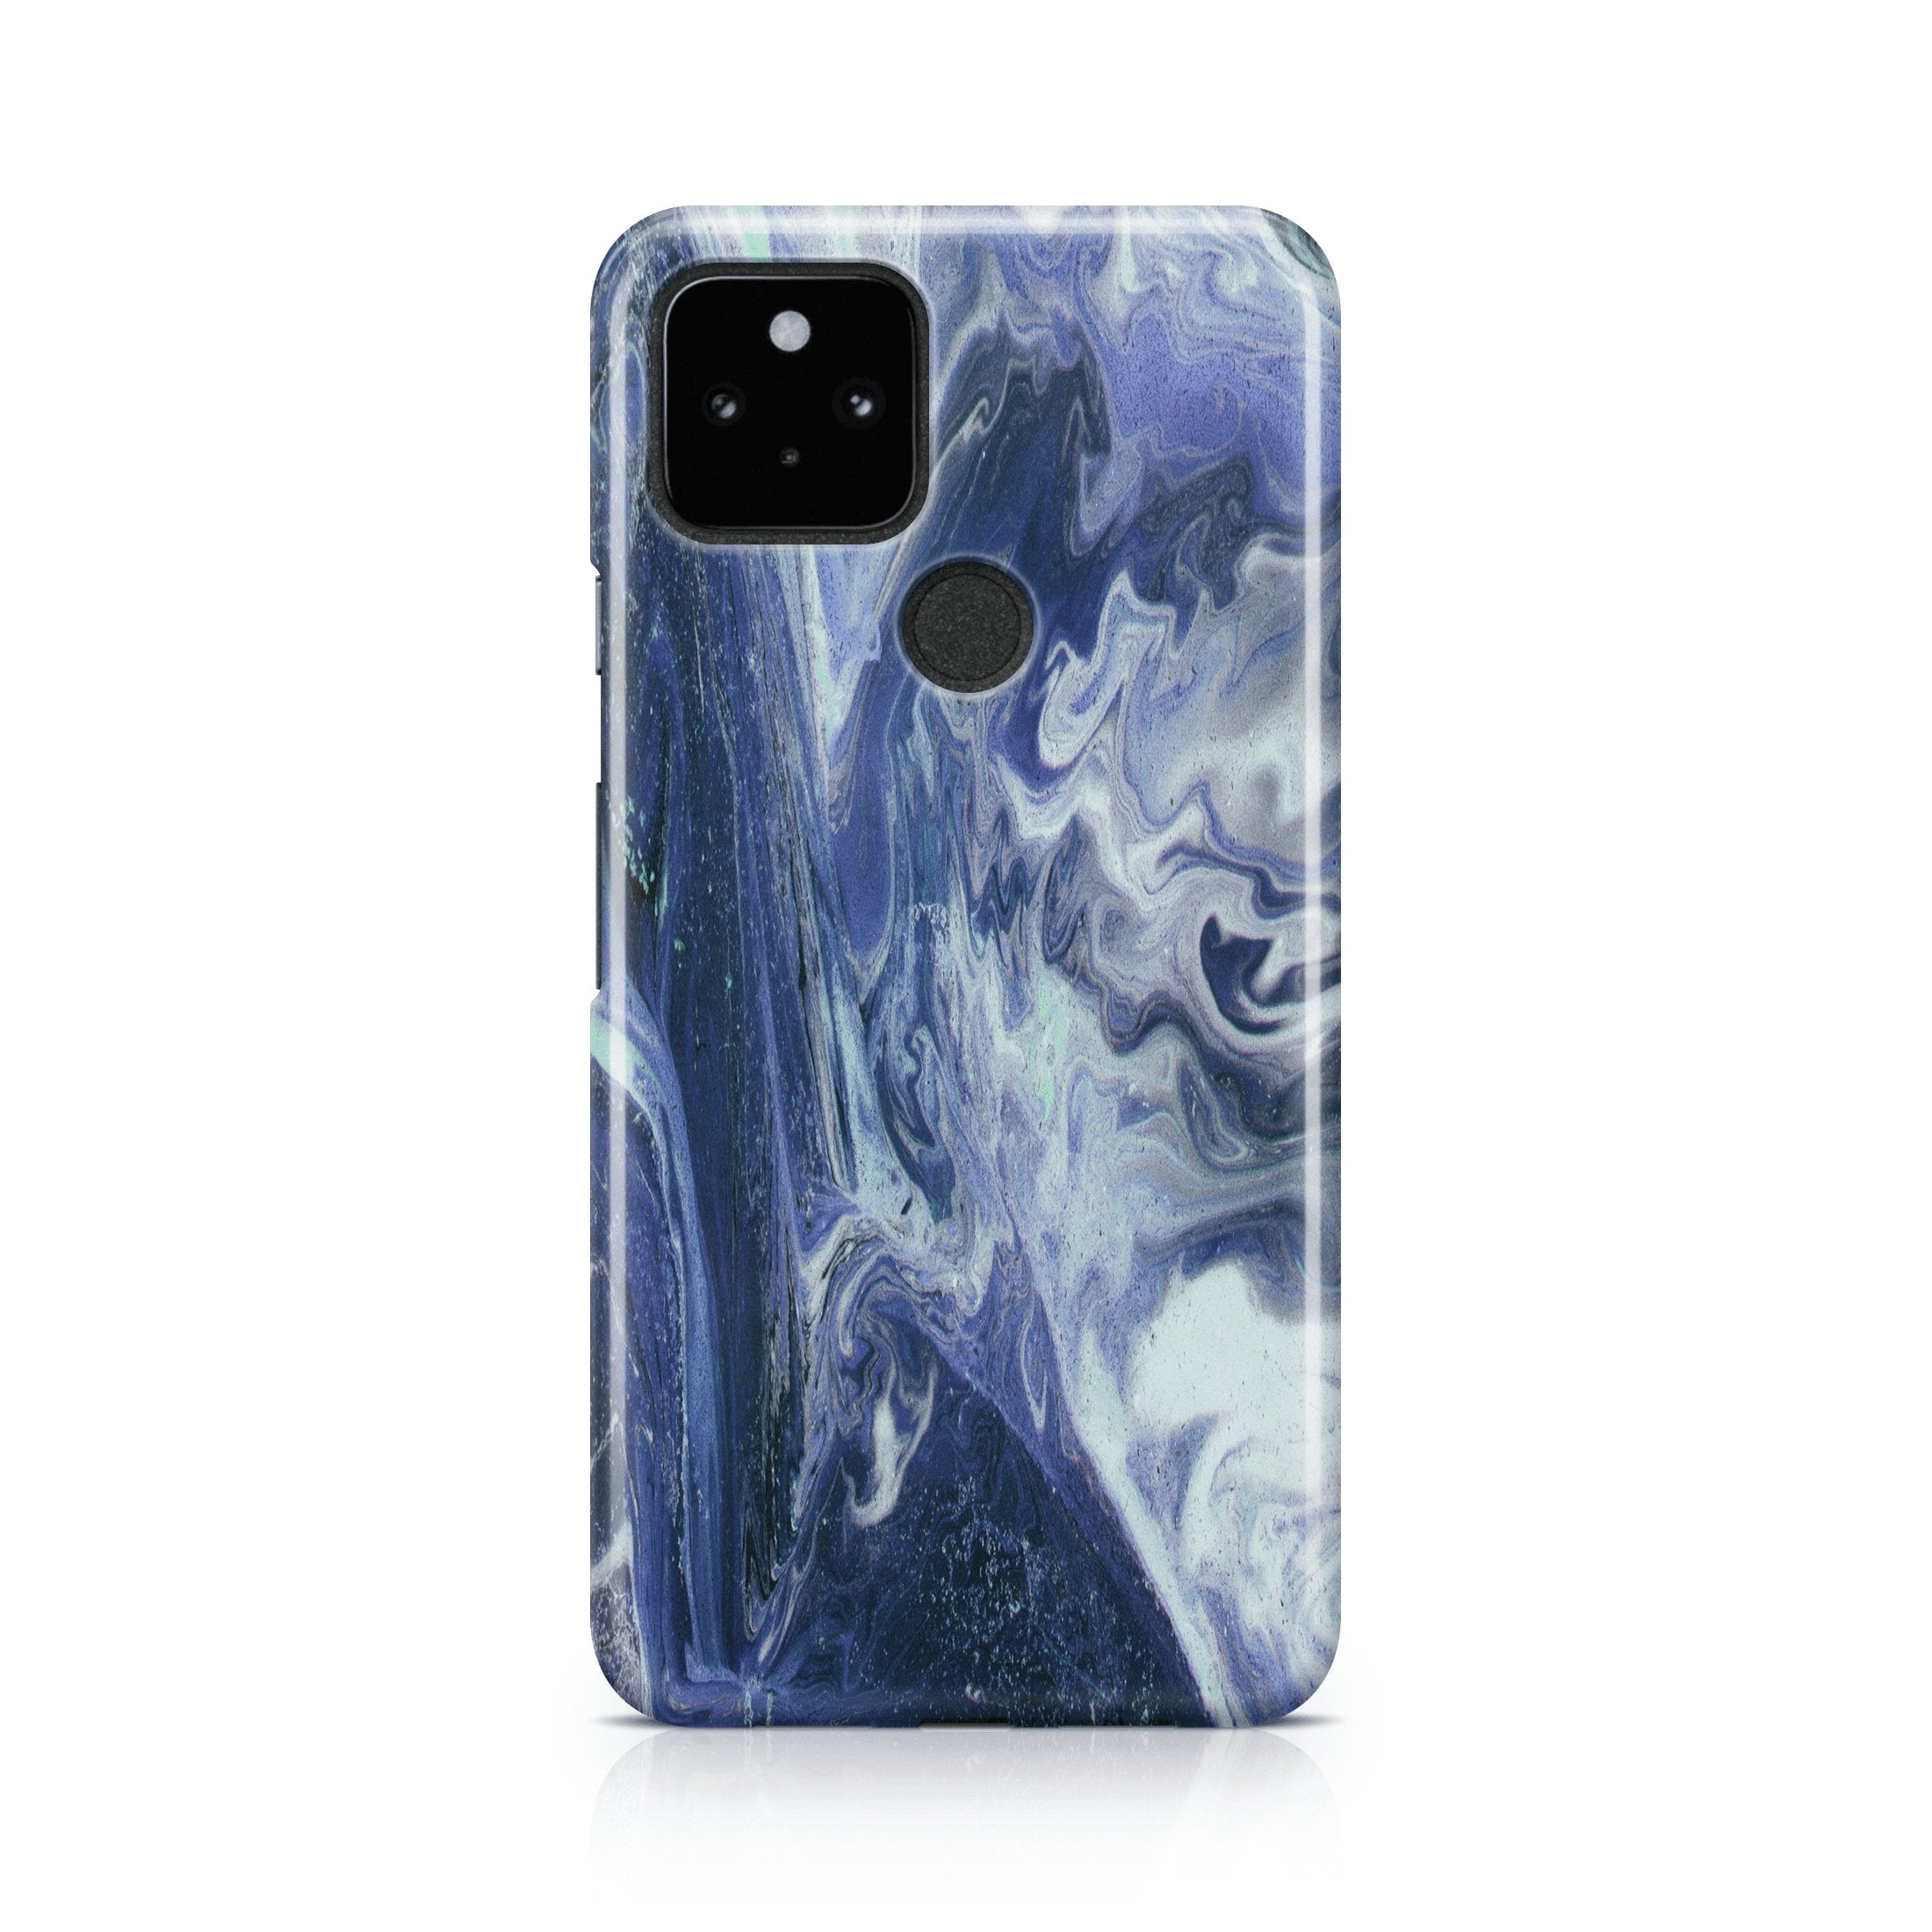 Dark Blue Agate - Google phone case designs by CaseSwagger